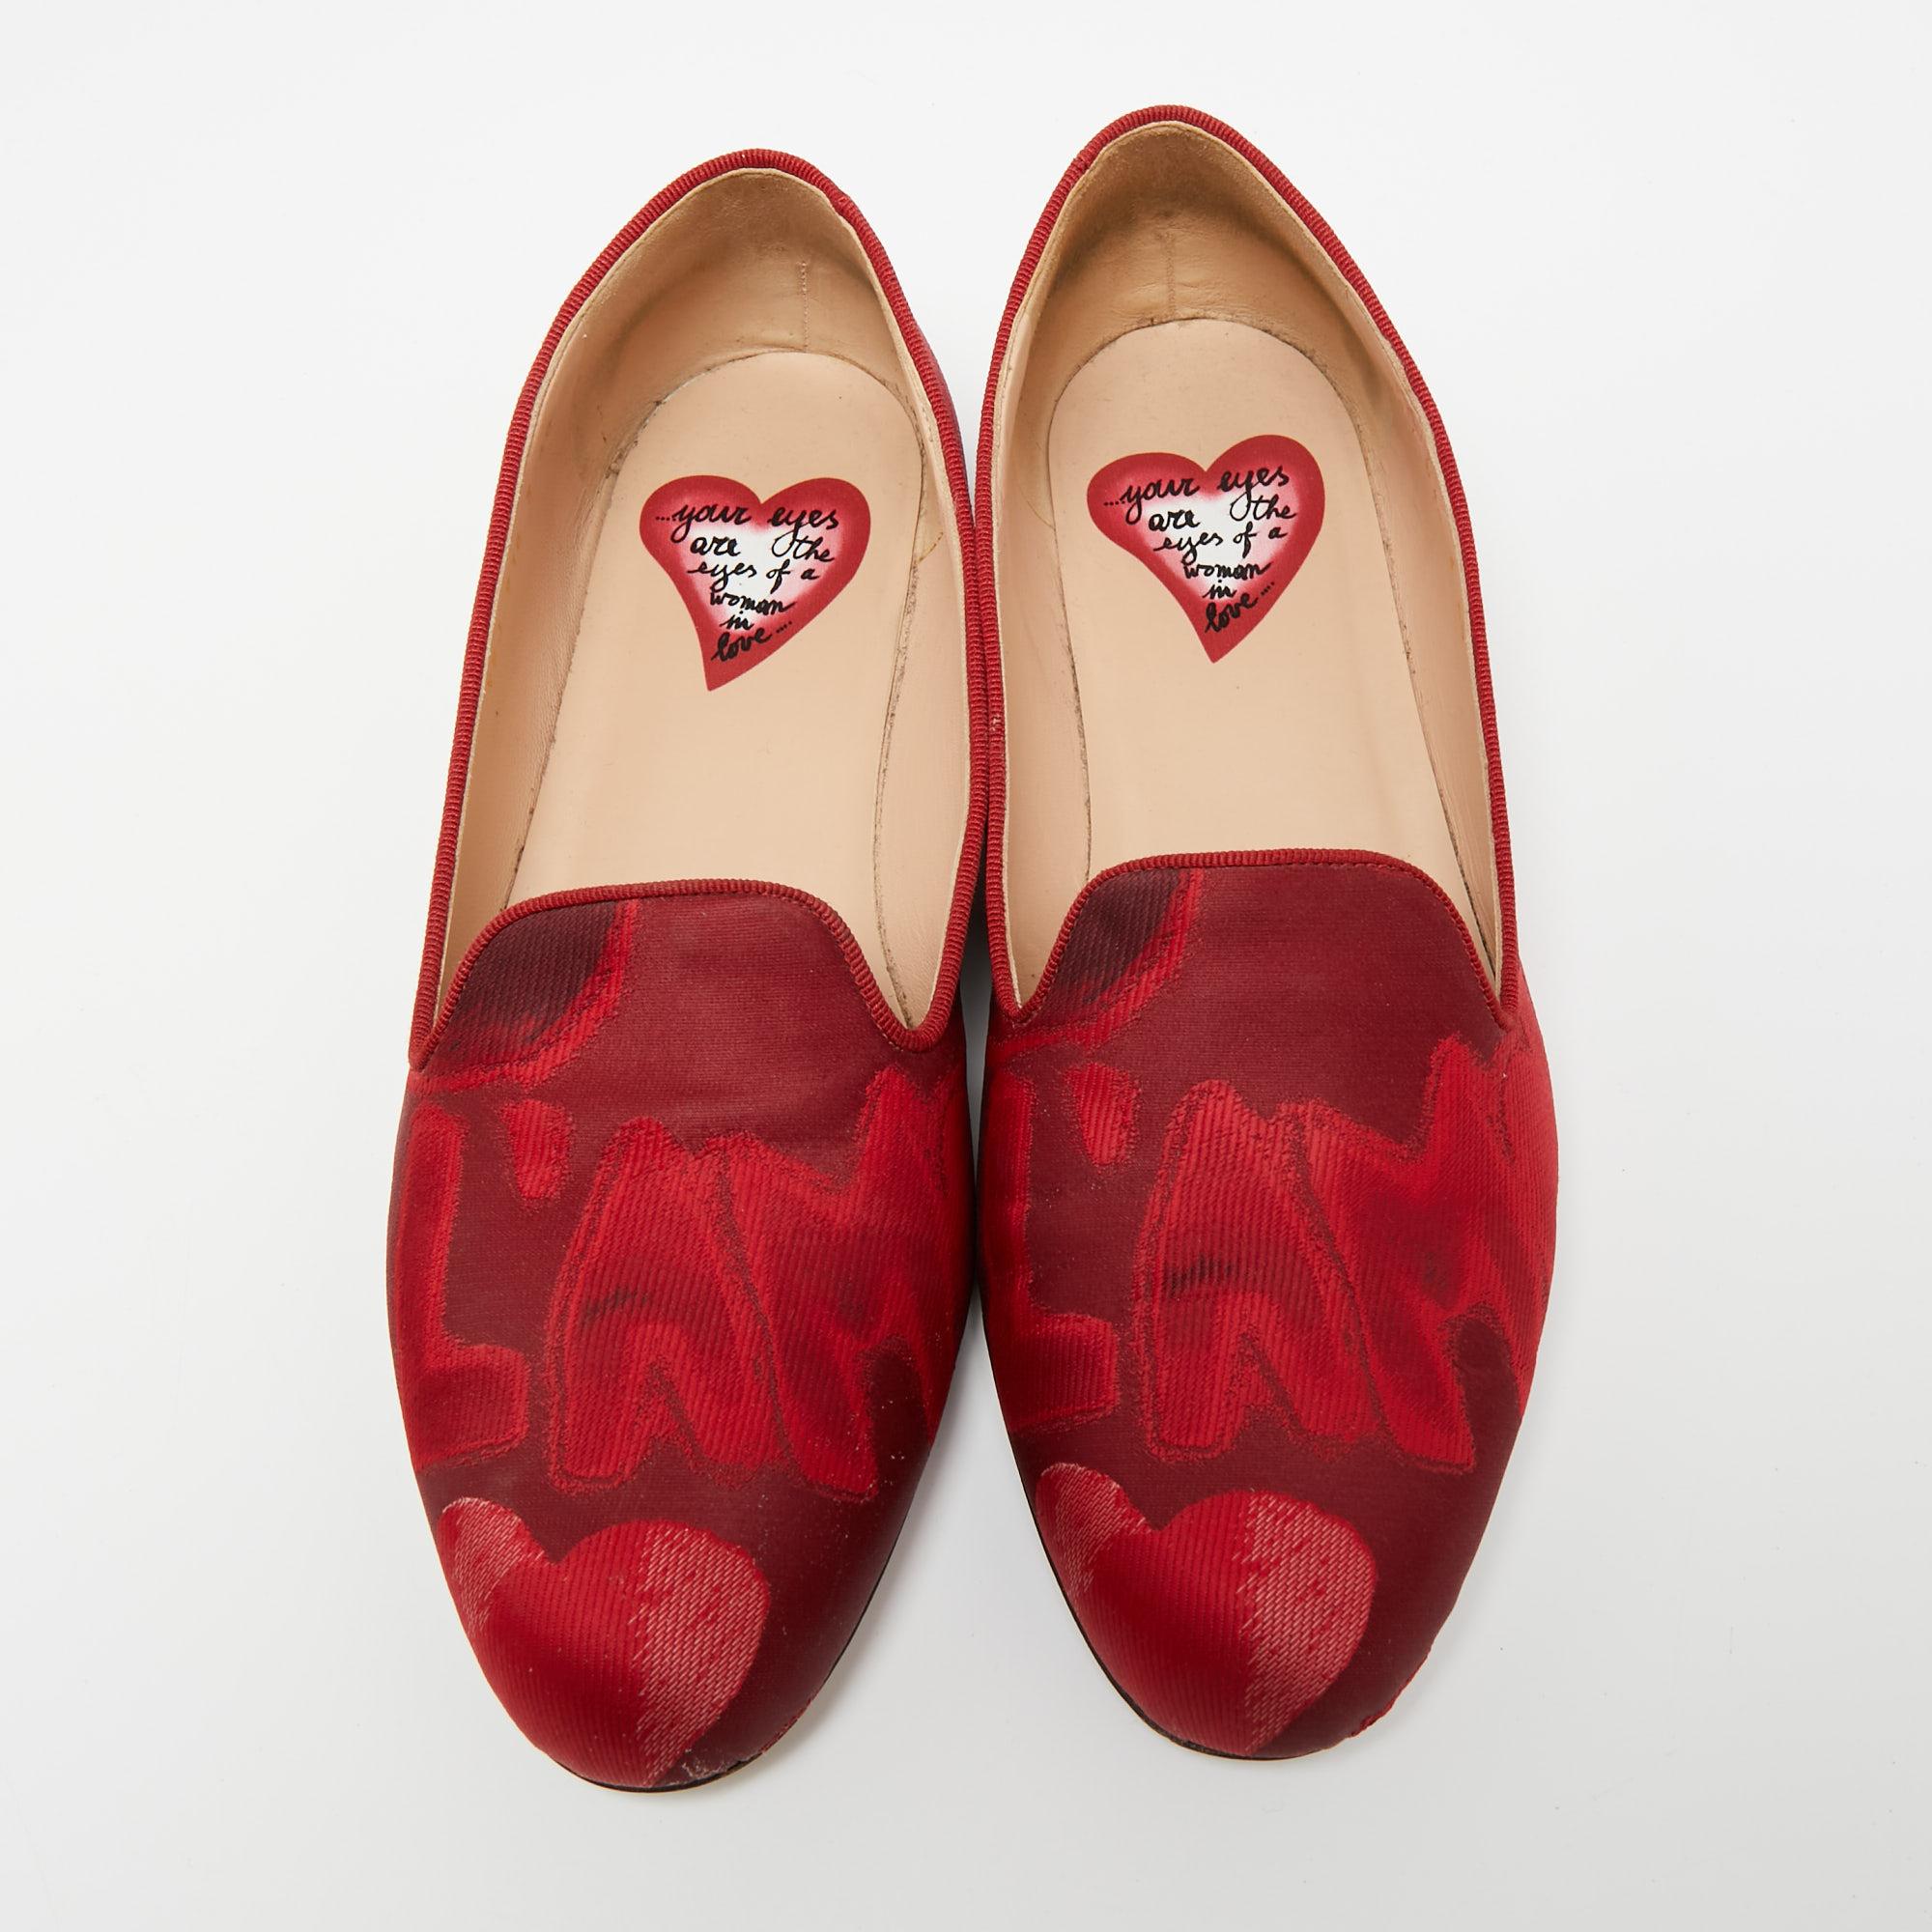 Valentino Red Satin Embroidered Smoking Slippers Size 40 In Good Condition For Sale In Dubai, Al Qouz 2